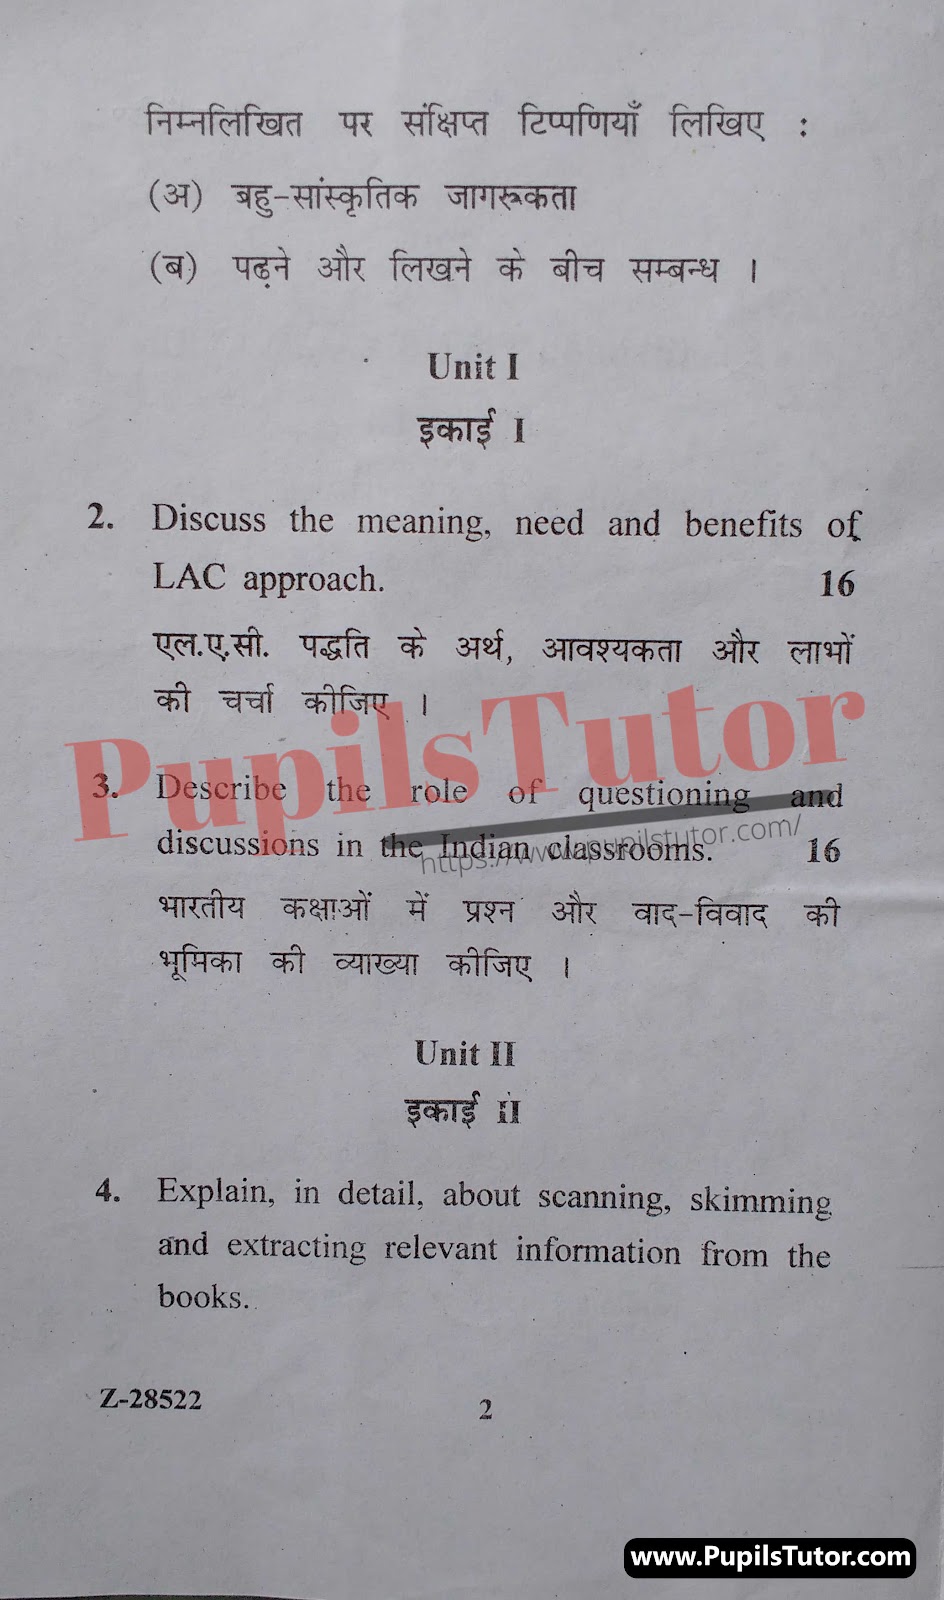 Chaudhary Ranbir Singh University (CRSU), Jind, Haryana B.Ed Language Across The Curriculum Second Year Important Question Answer And Solution - www.pupilstutor.com (Paper Page Number 2)